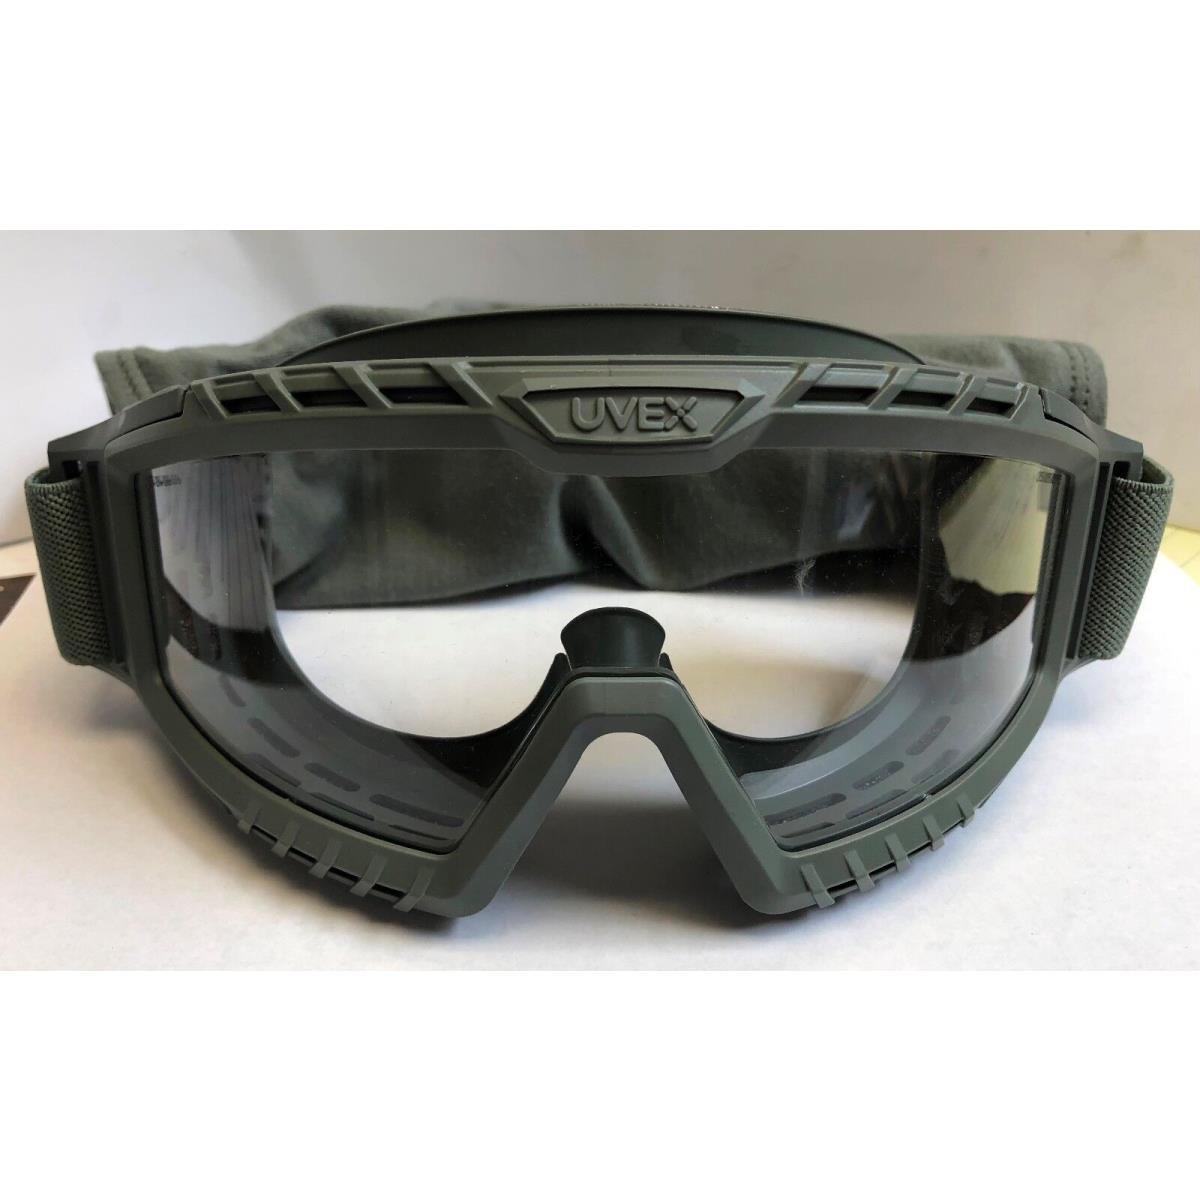 Uvex Xmf Tactical Safety Goggles S077D Green Body Clear Lens Dura-streme